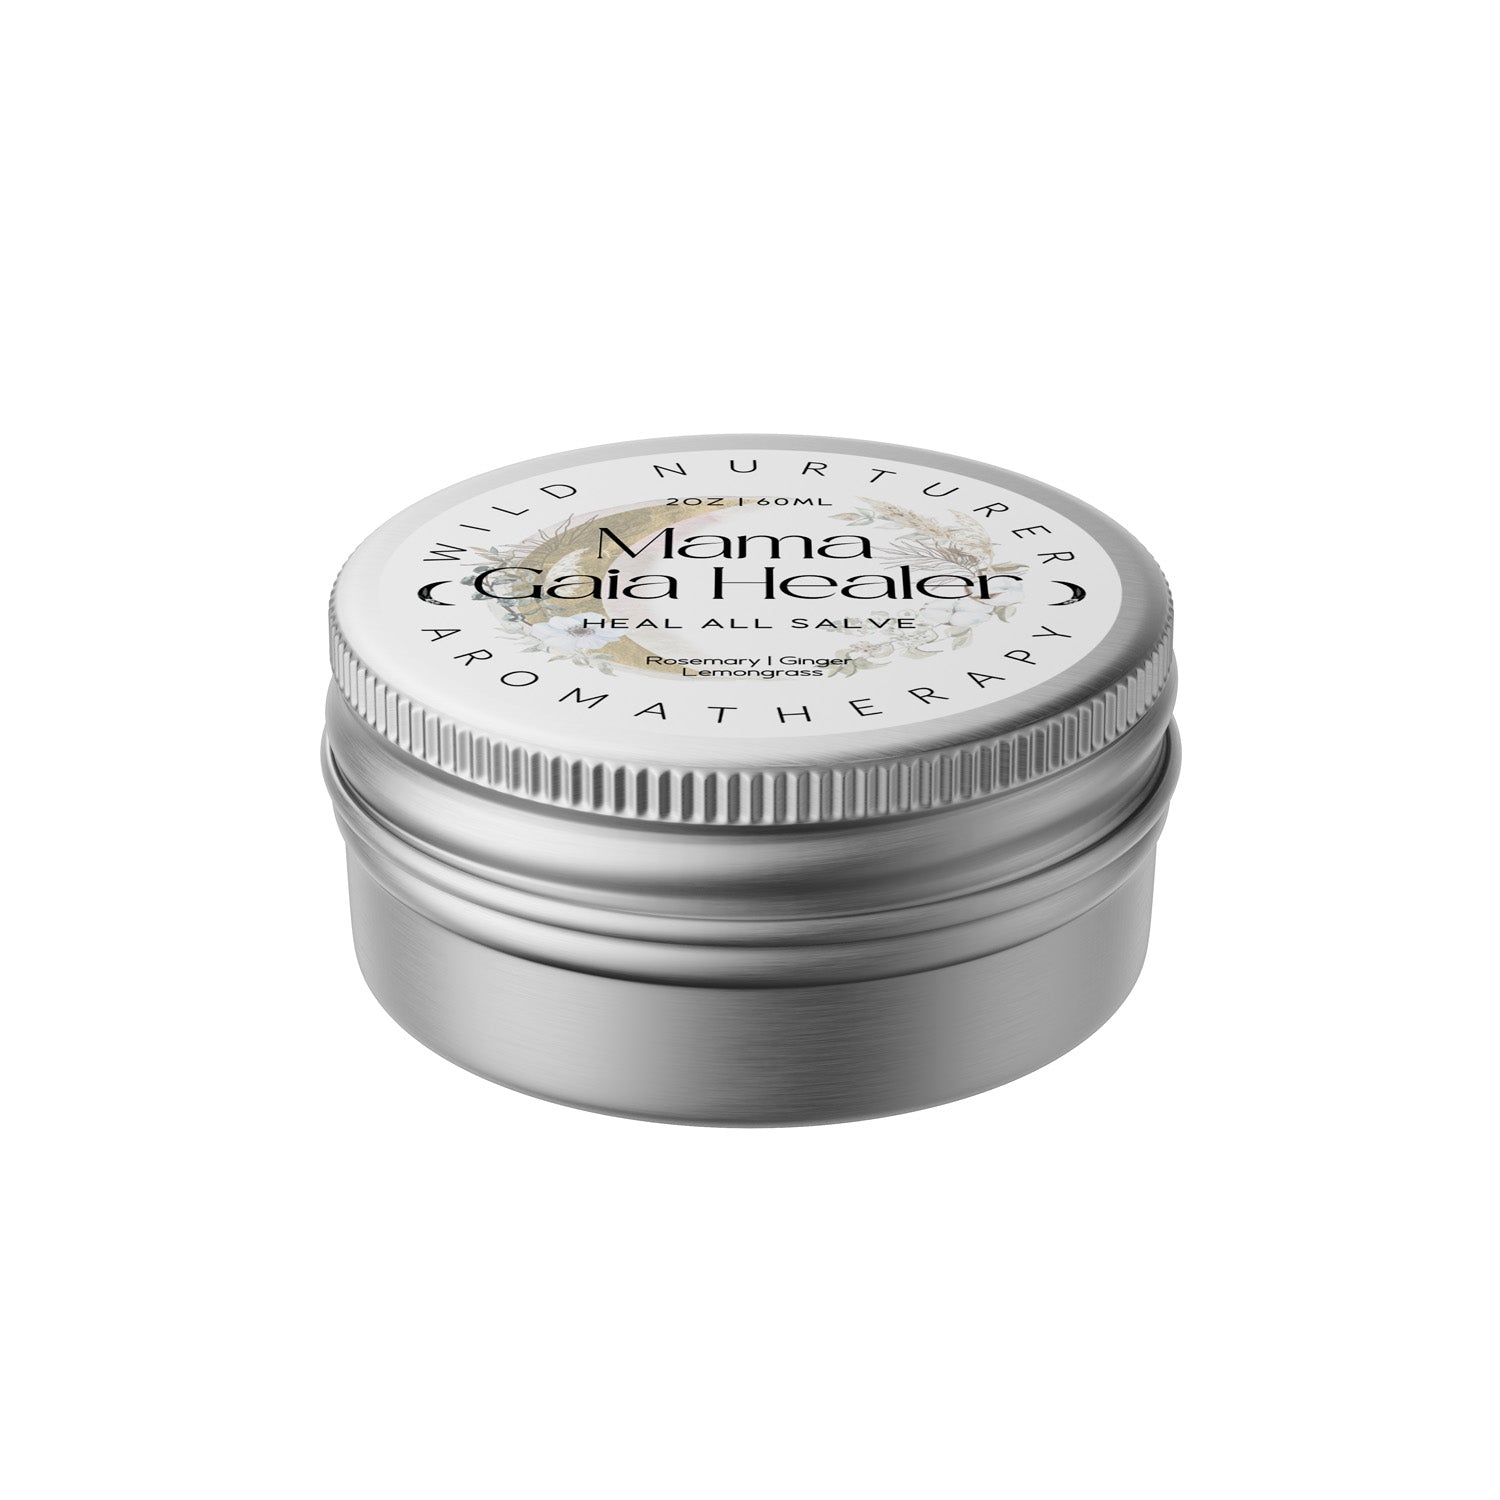 A closed metal tin of Wild Nurturer Aromatherapy Mama Gaia Healer Heal-All: Organic First-Aid Healing Salve, featuring essential oil and a detailed, embossed lid, isolated on a white background.